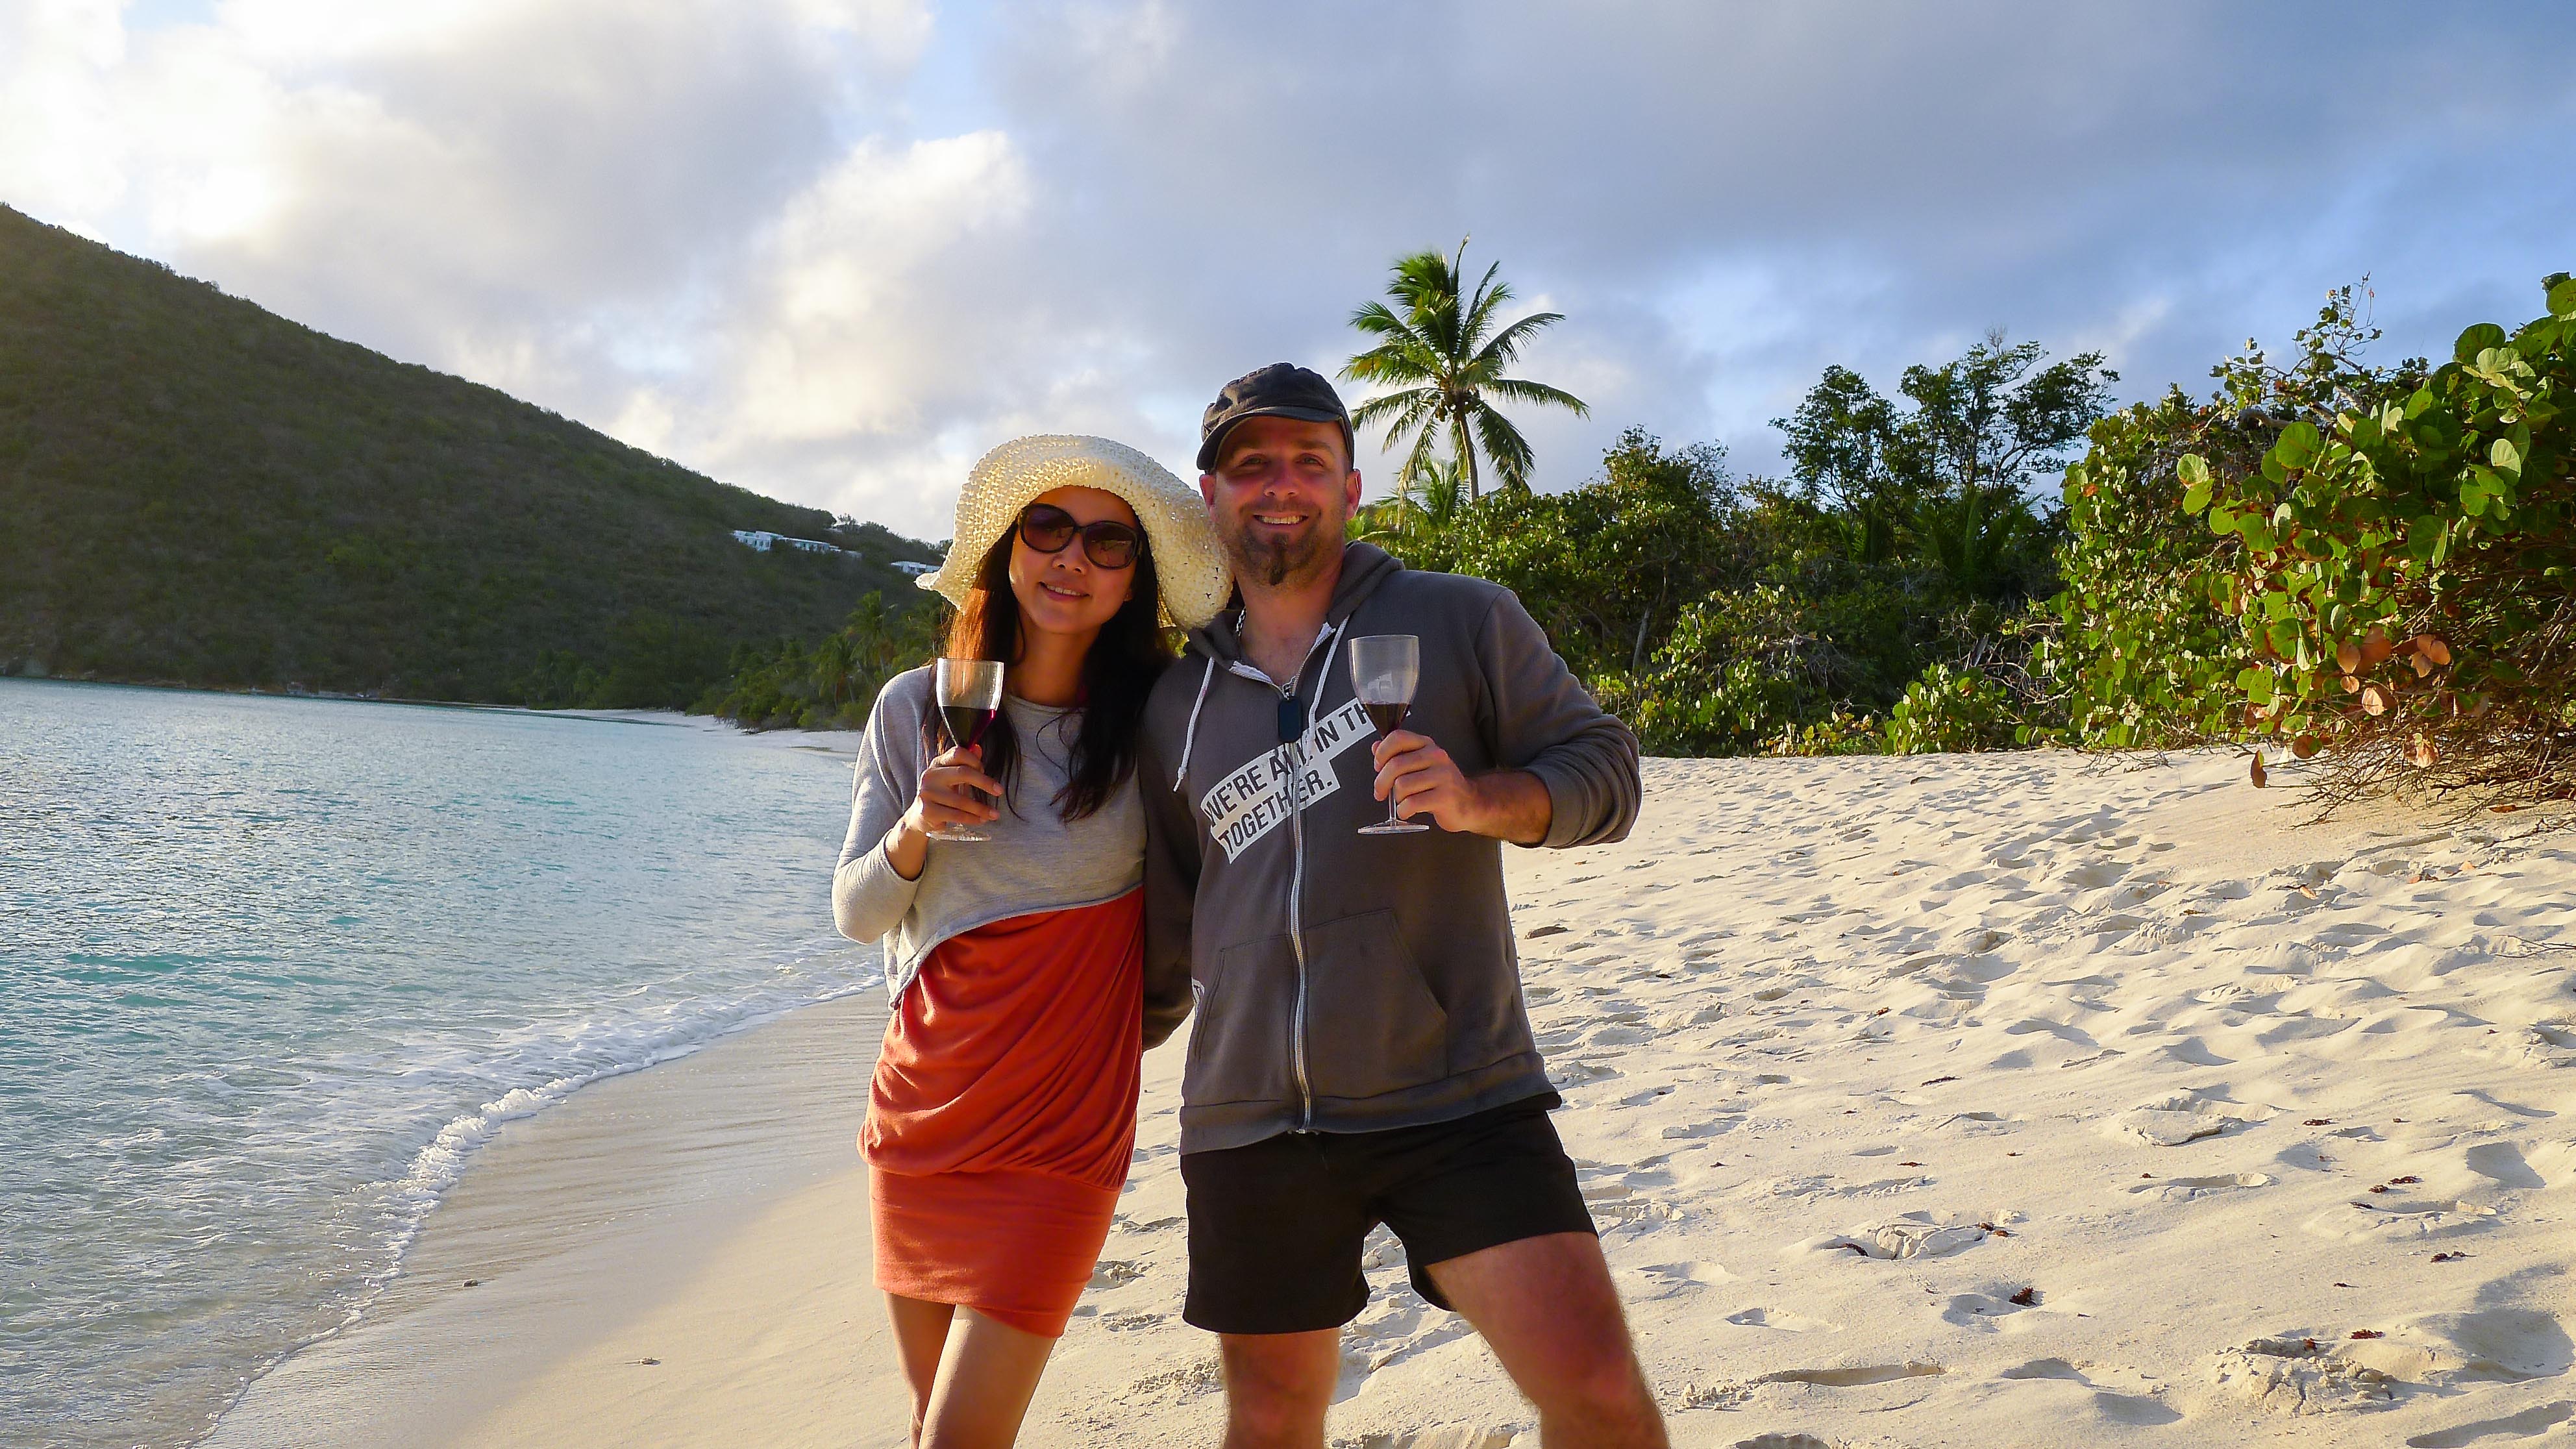 This Couple Saved $100,000 a Year, Retired Early and Now Travel the World. Here's How They Did It